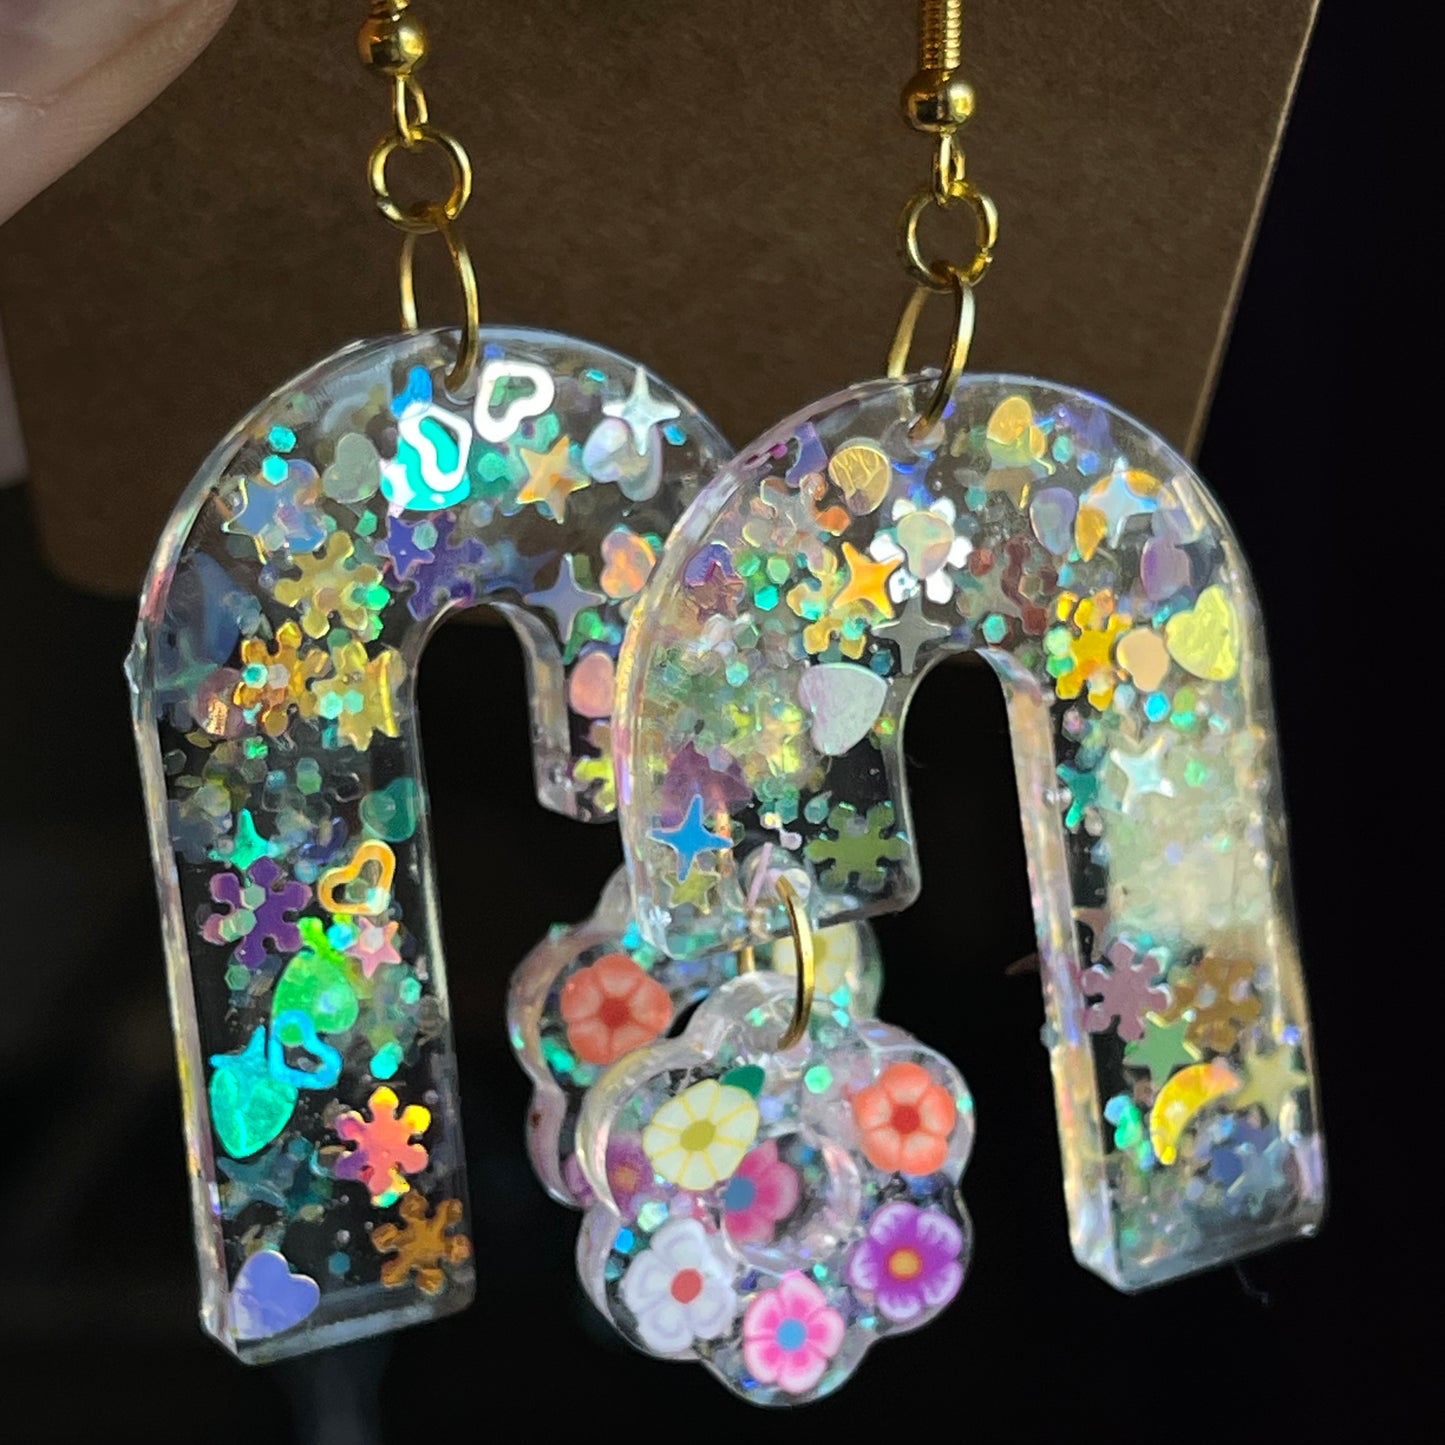 UV resin earrings!! 3 pairs - Tuesday 5/14 at 6pm